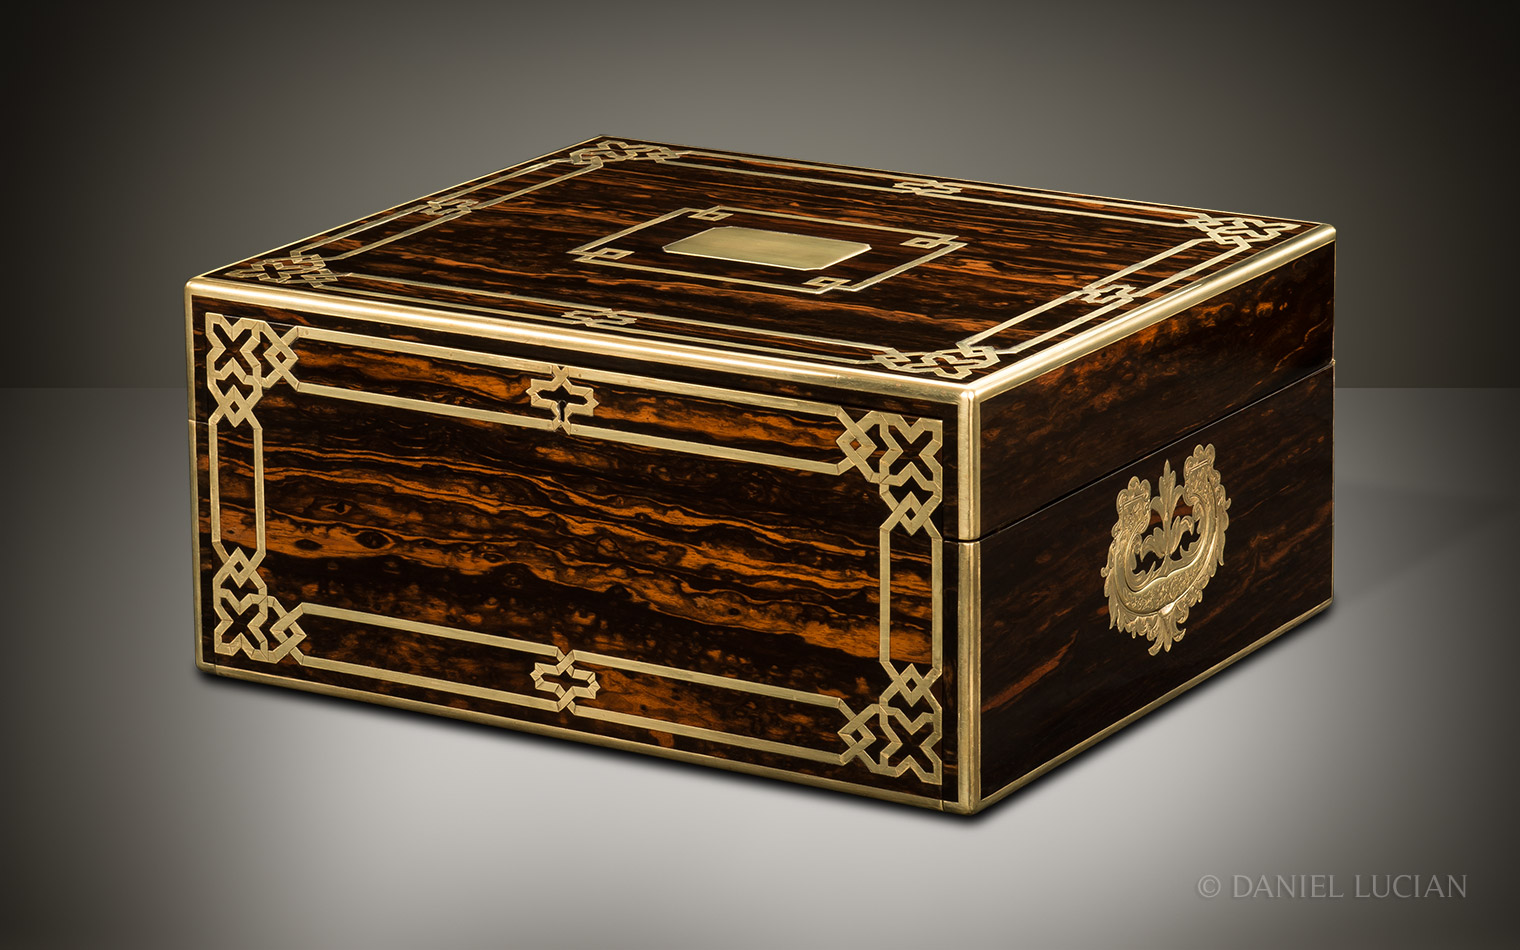 Asprey ‘Exhibition’ Piece - Antique Jewellery Box in Coromandel with Brass Inlay and Secret Compartments